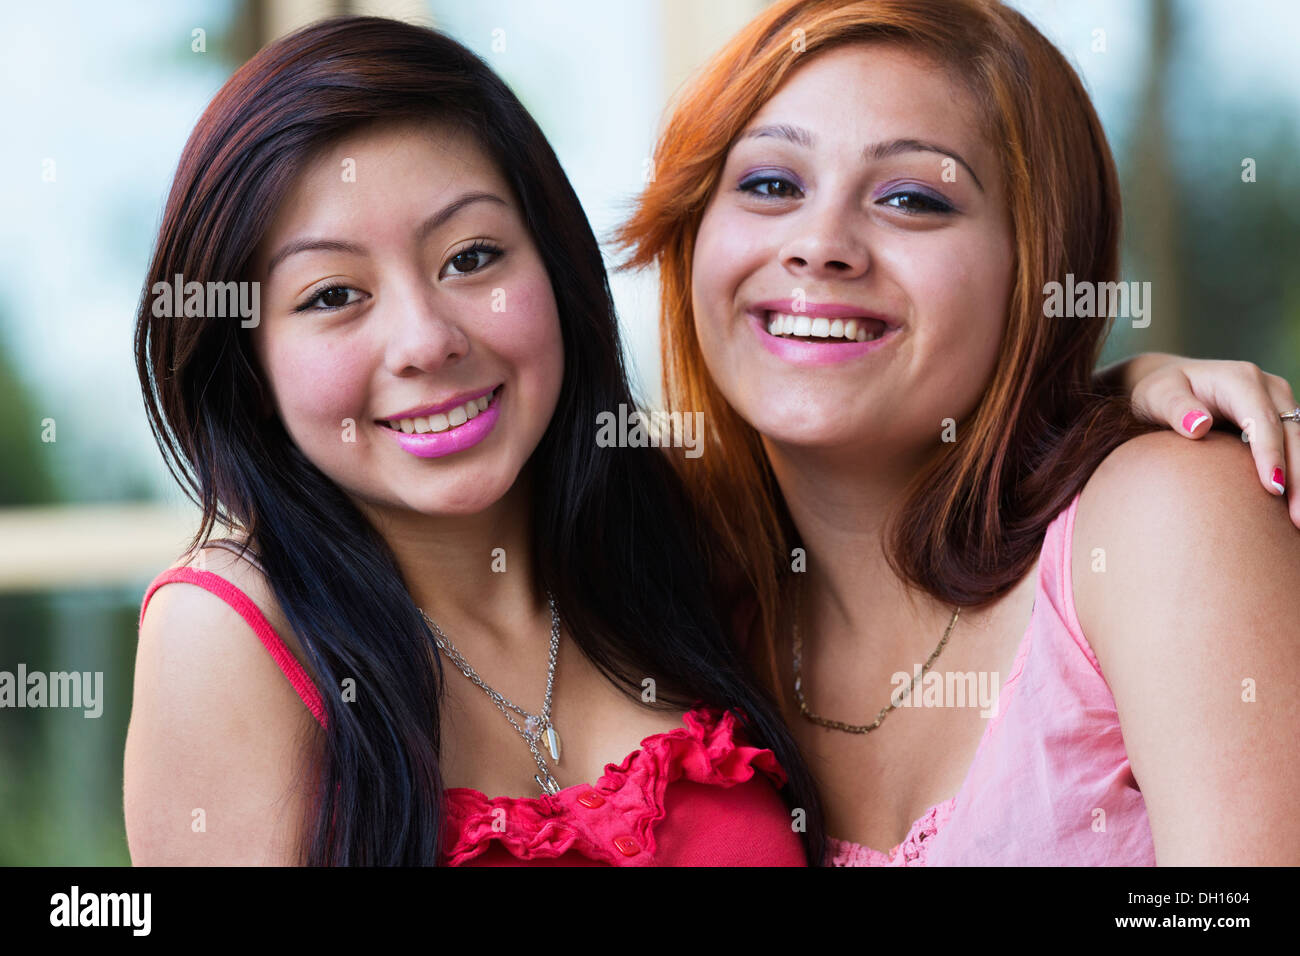 Hispanic girls smiling outdoors Banque D'Images